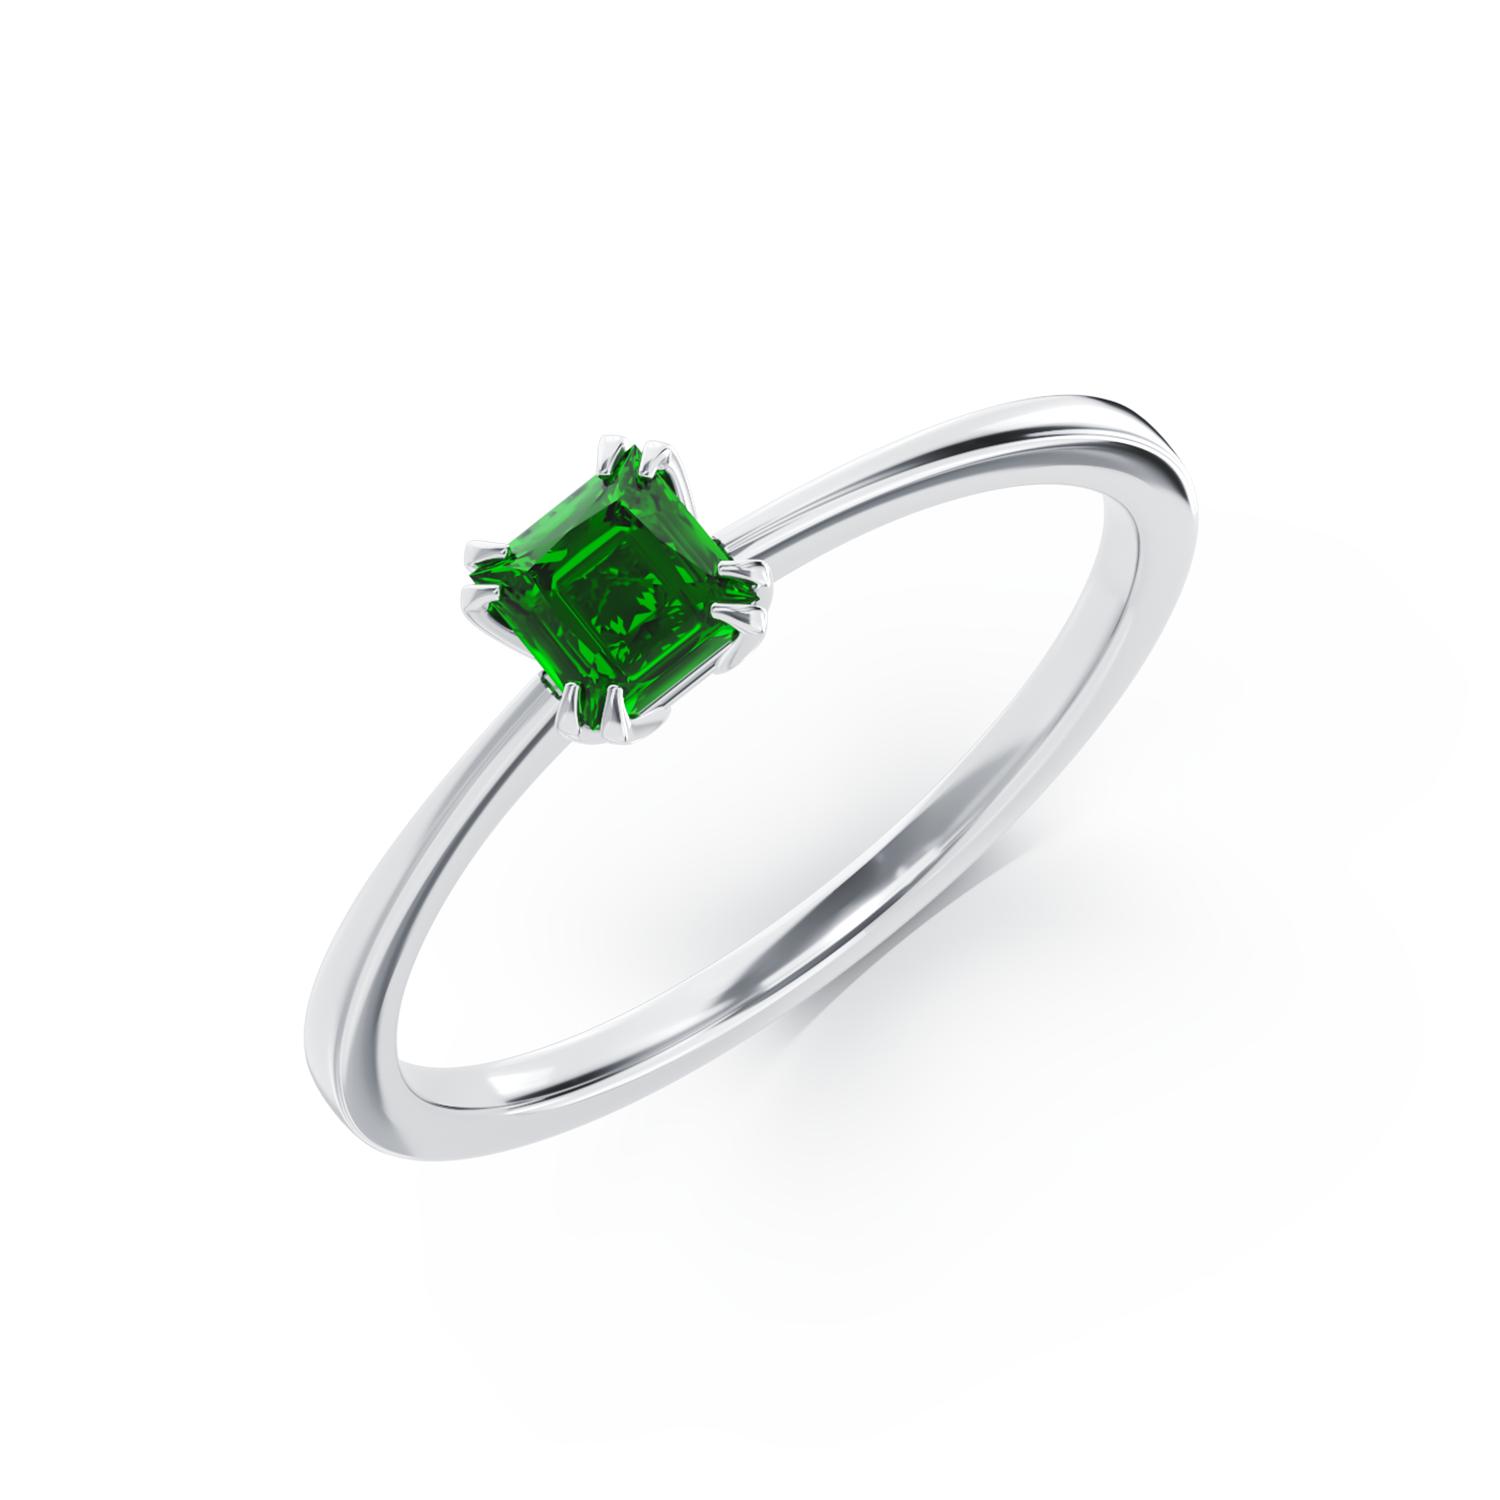 18K white gold engagement ring with 0.41ct solitaire emerald